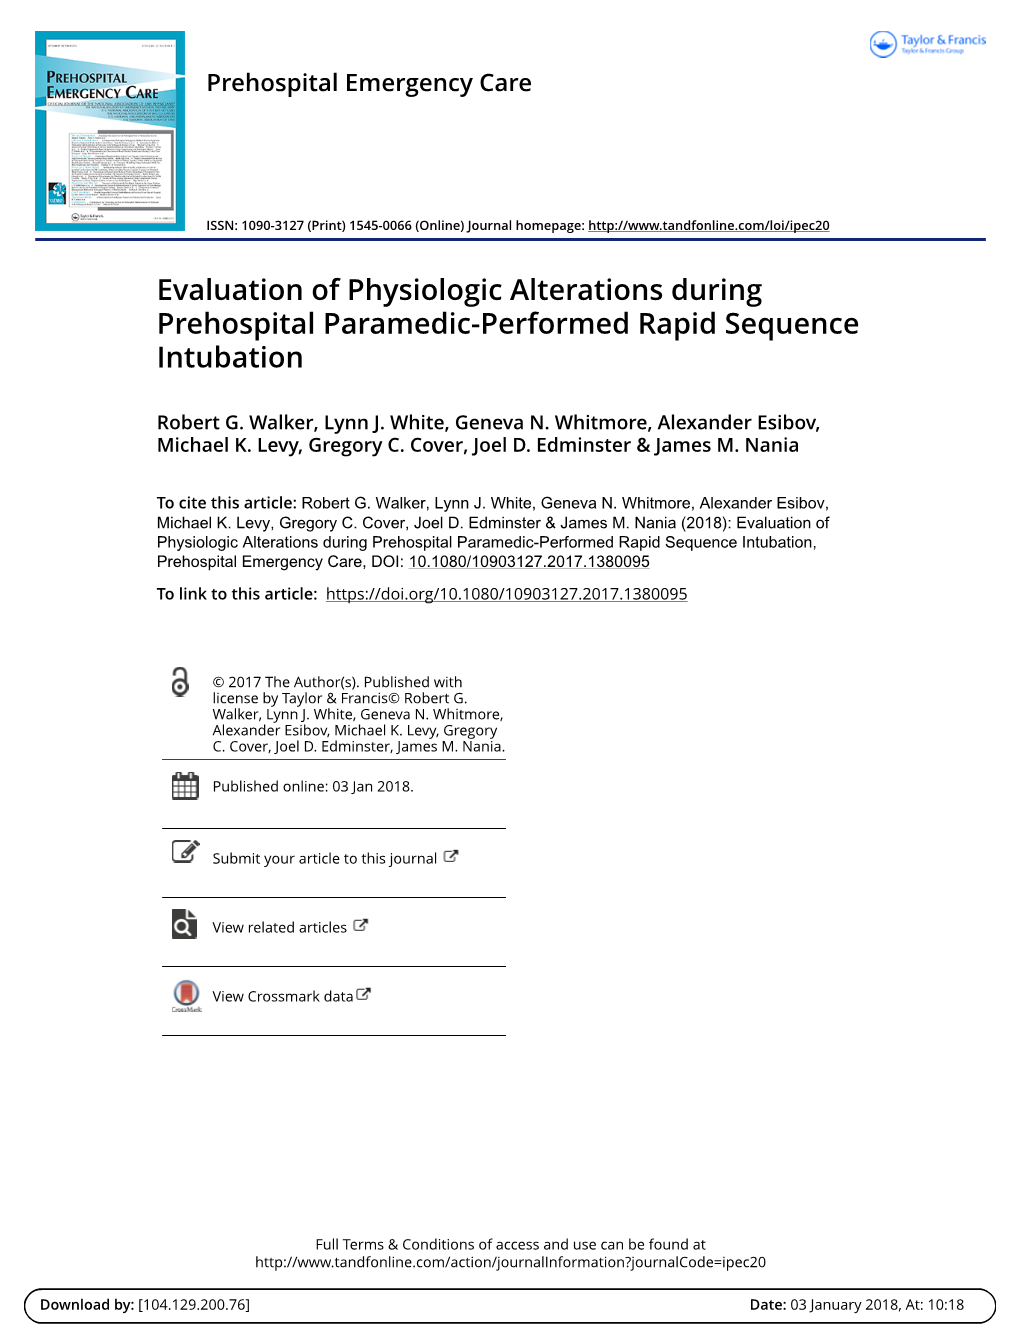 Evaluation of Physiologic Alterations During Prehospital Paramedic-Performed Rapid Sequence Intubation